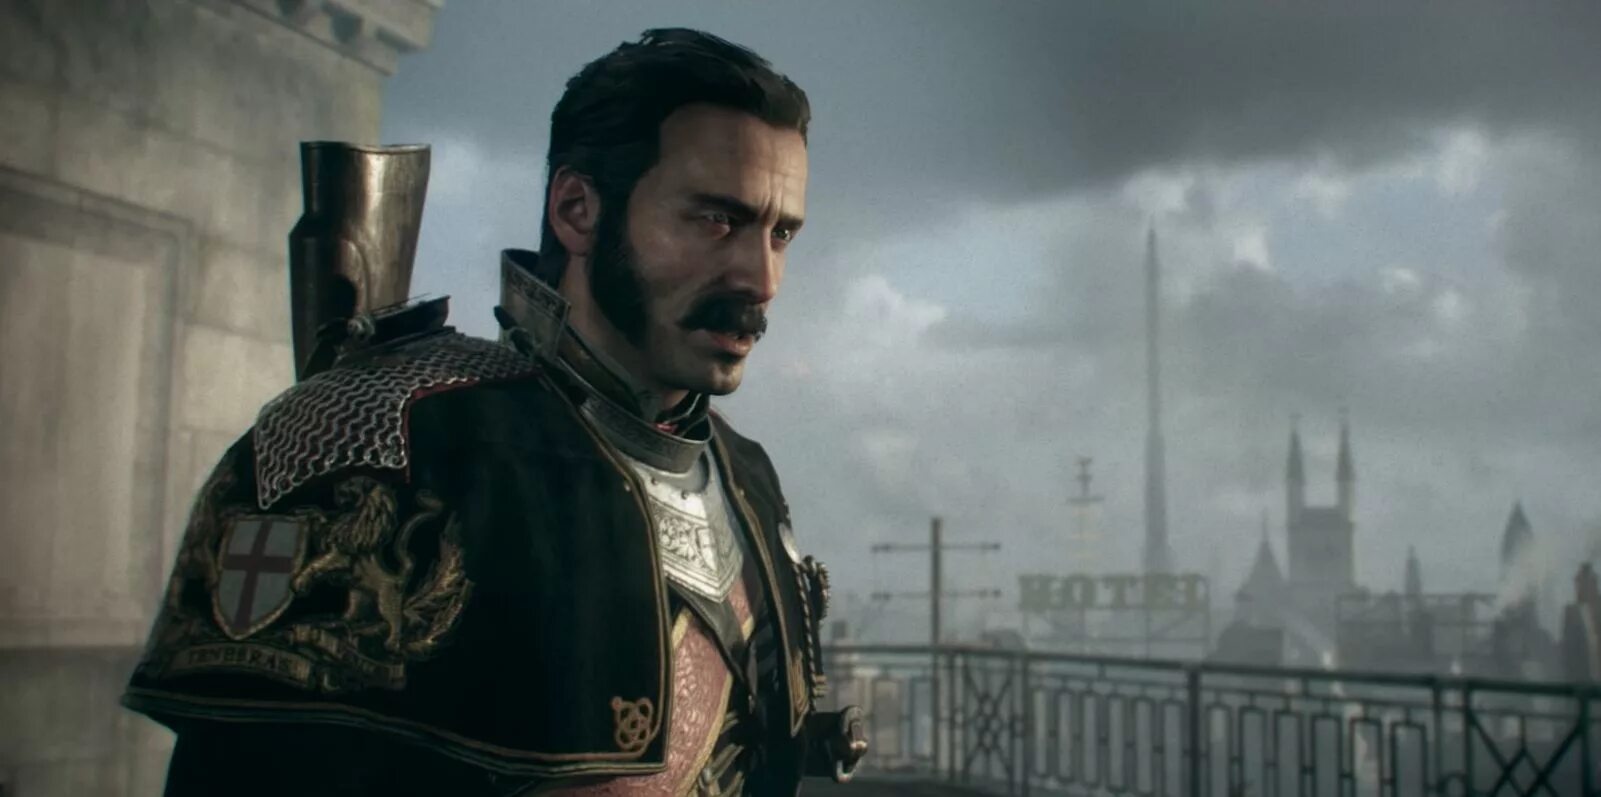 The order на пк. The order: 1886. The order 1886 Gameplay. Ордер 1886 ps4. The order 1886 геймплей.